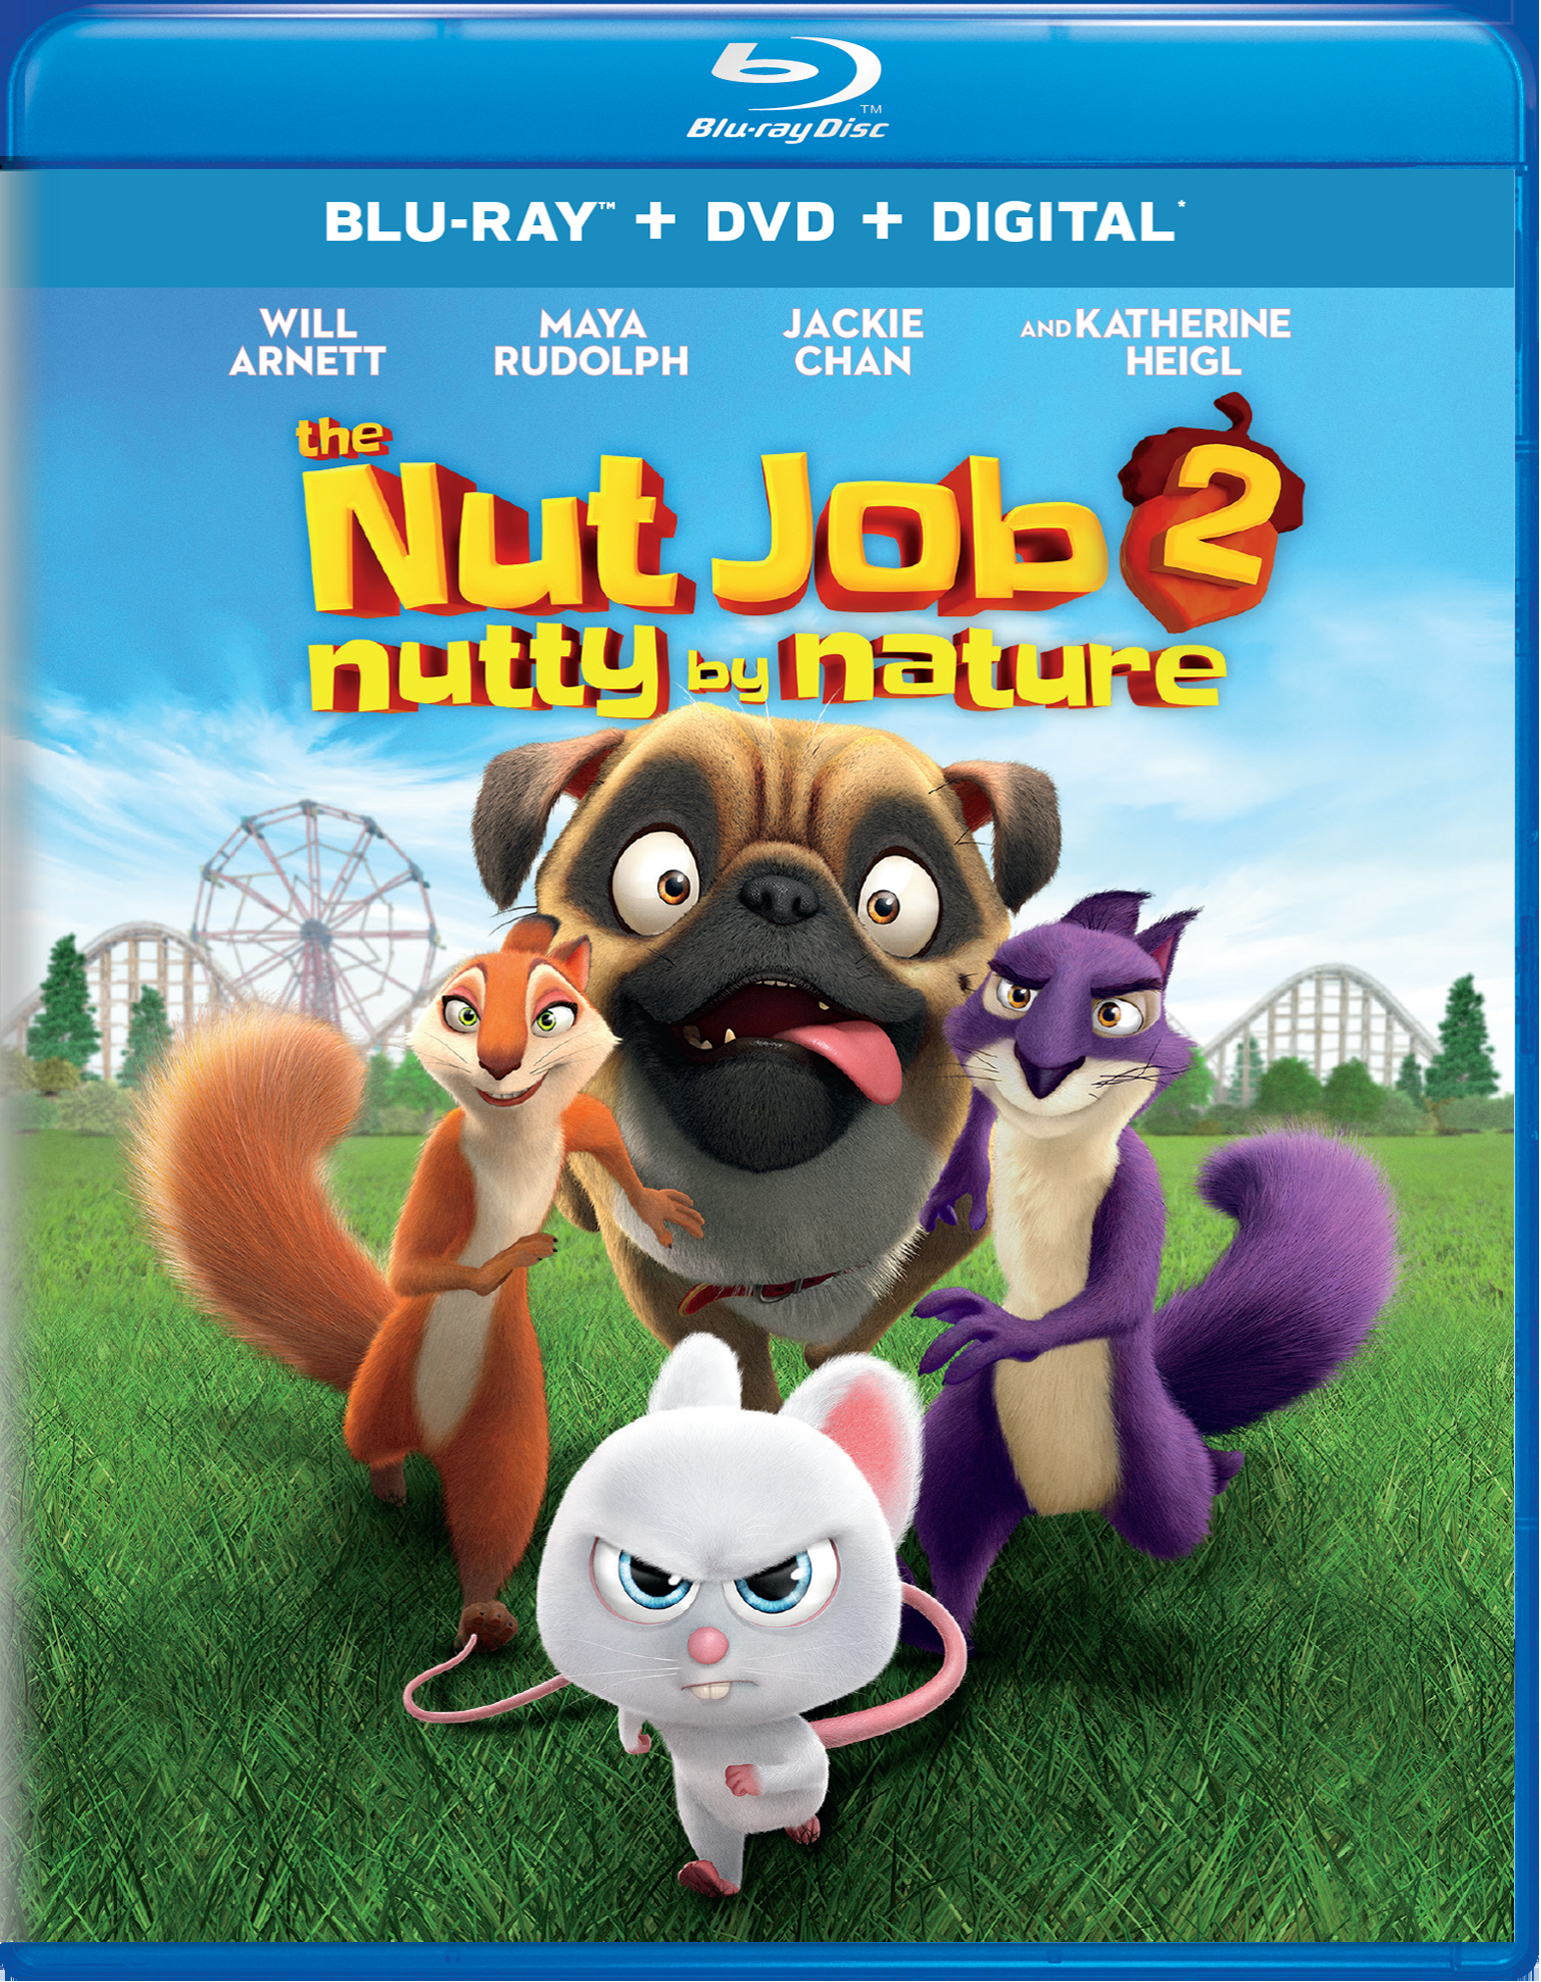 The Nut Job 2: Nutty By Nature (DVD + Digital) - Blu-ray [ 2017 ]  - Animation Movies On Blu-ray - Movies On GRUV